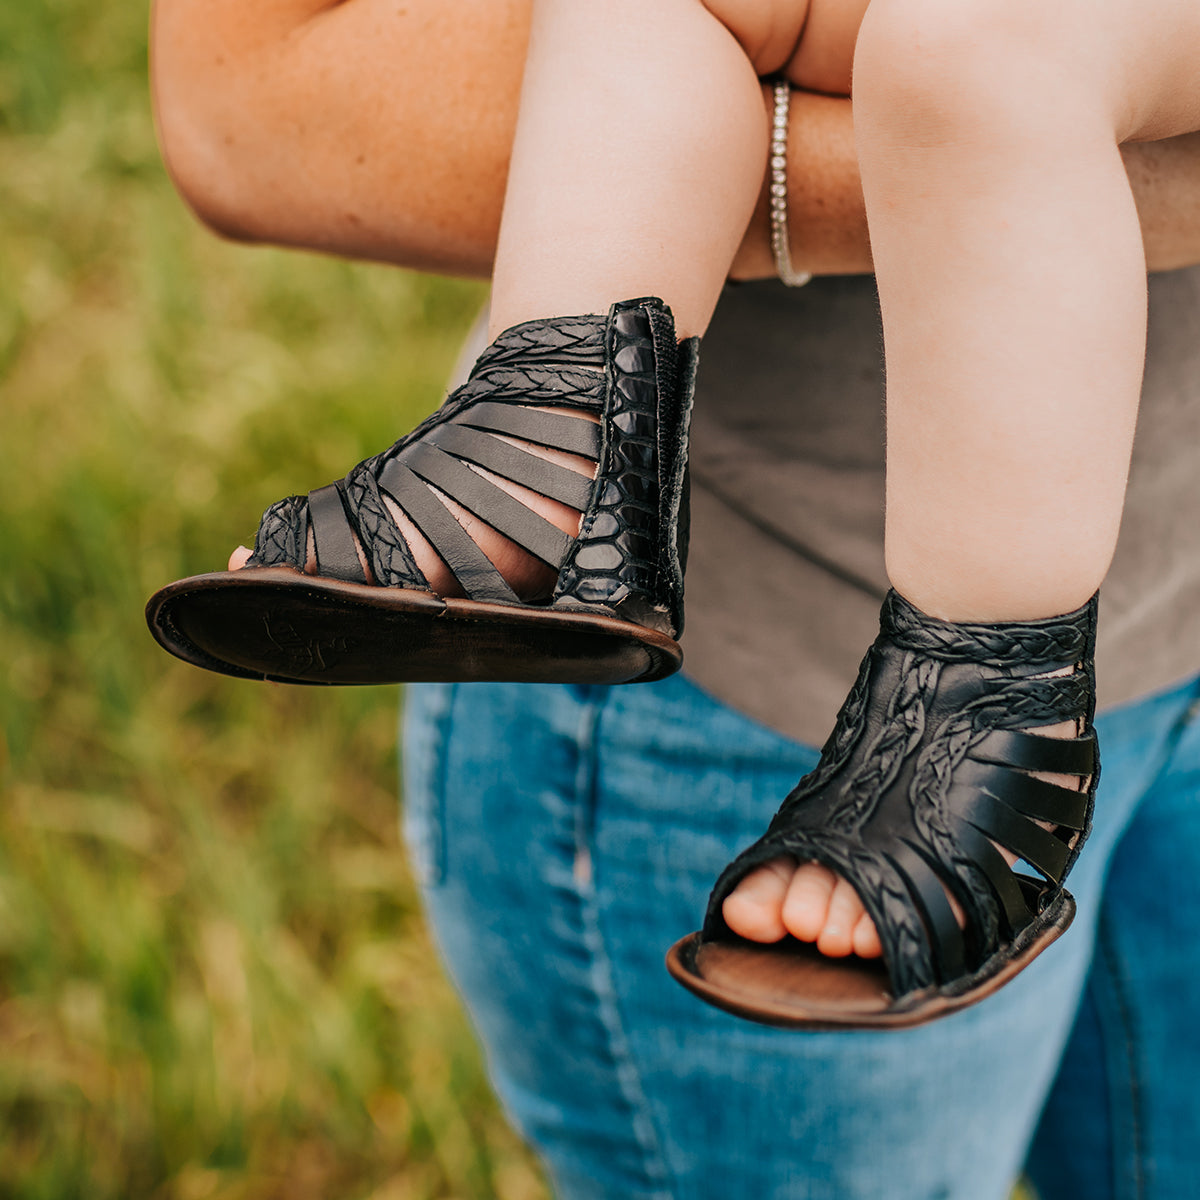 FREEBIRD infant baby bela black sandal with laser-cut leather, braided accents and a back velcro panel.